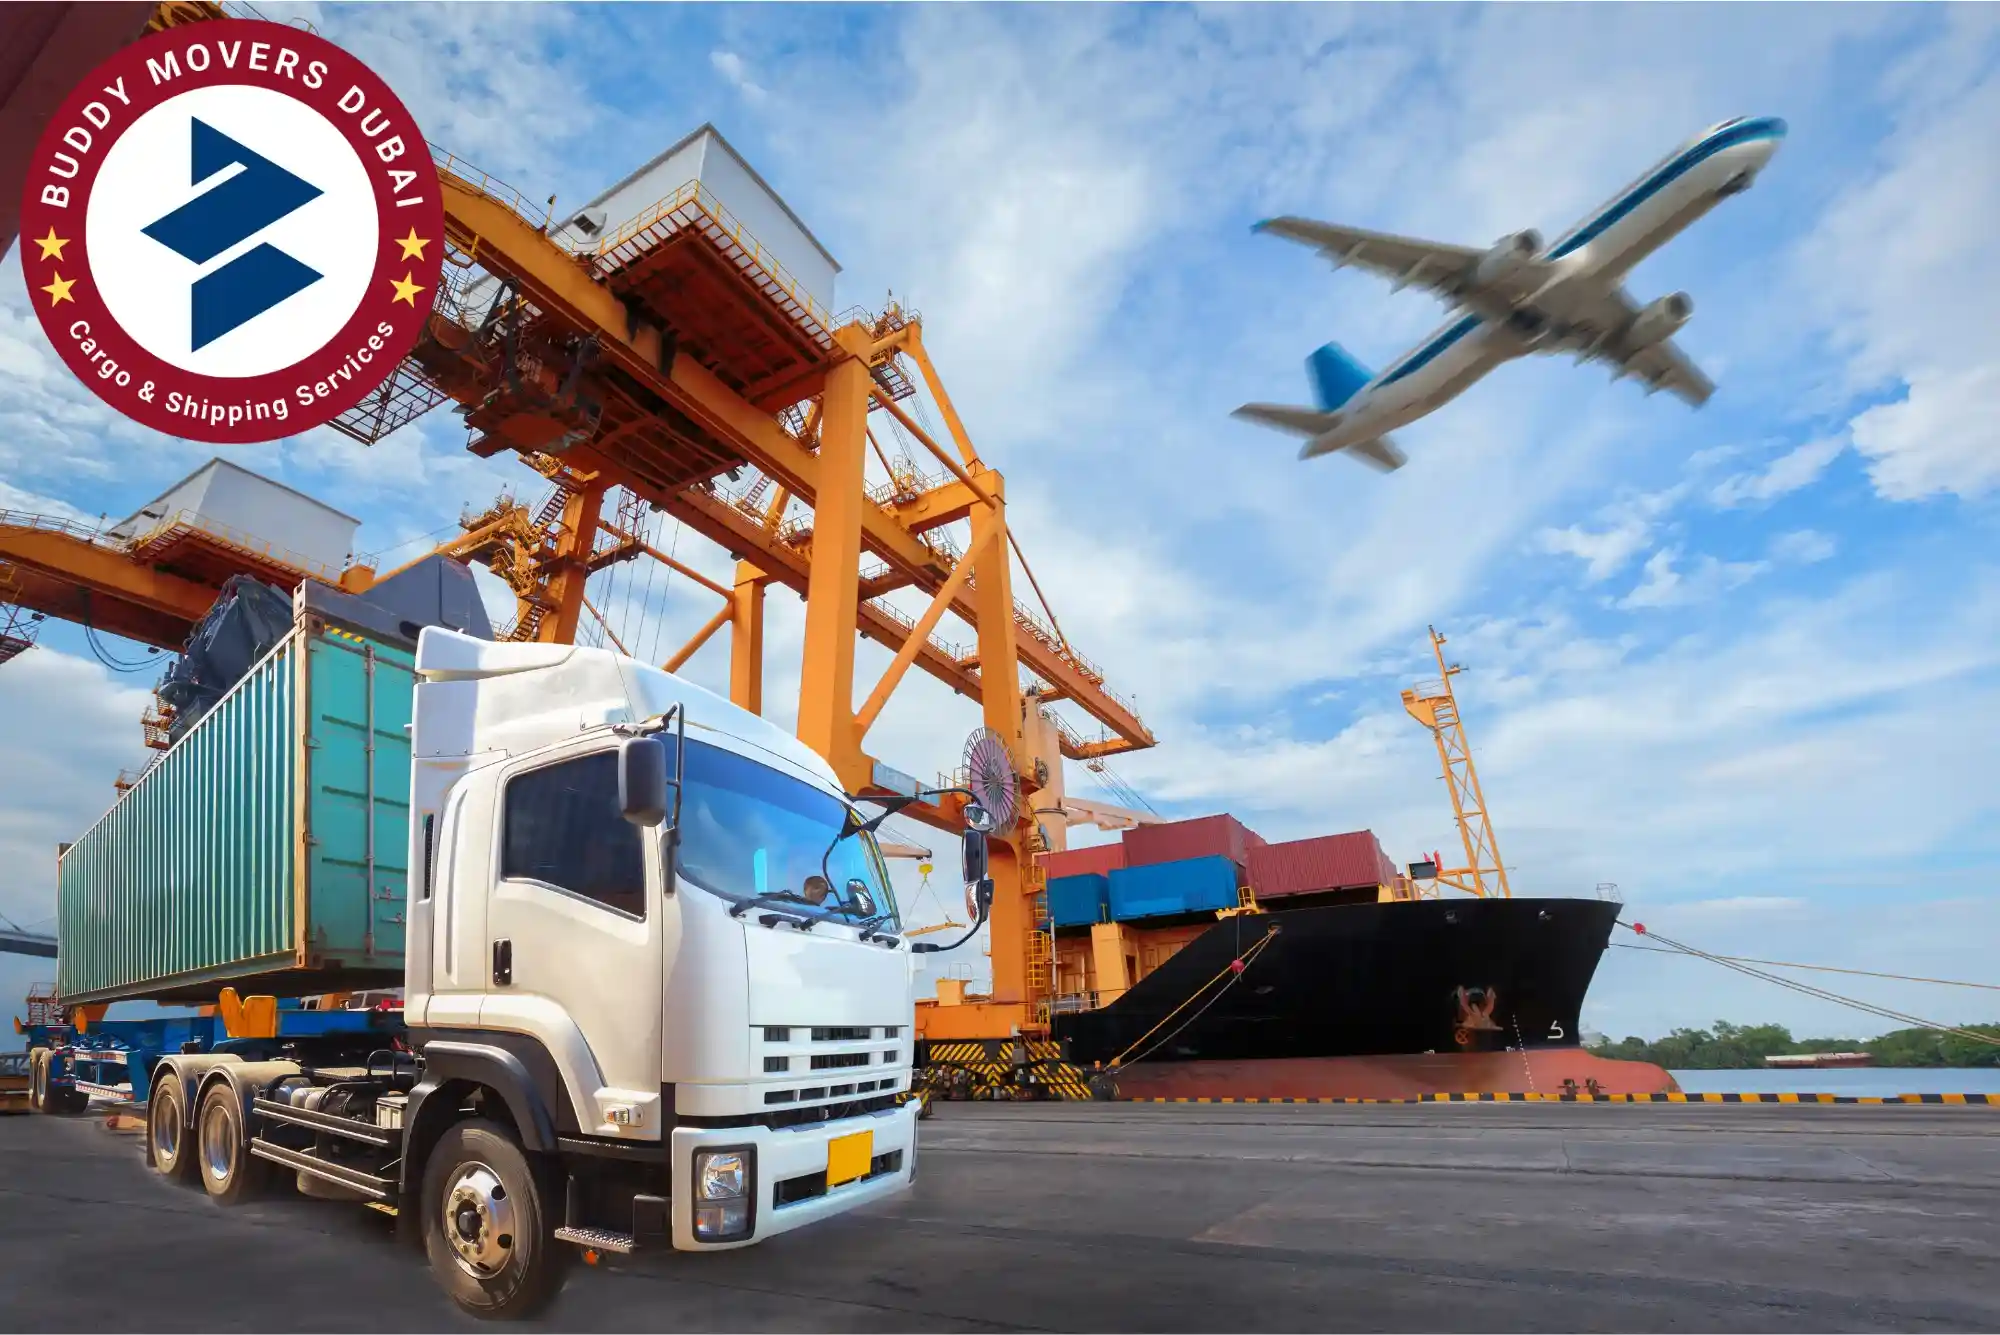 Shipping Services in Muhaisnah First